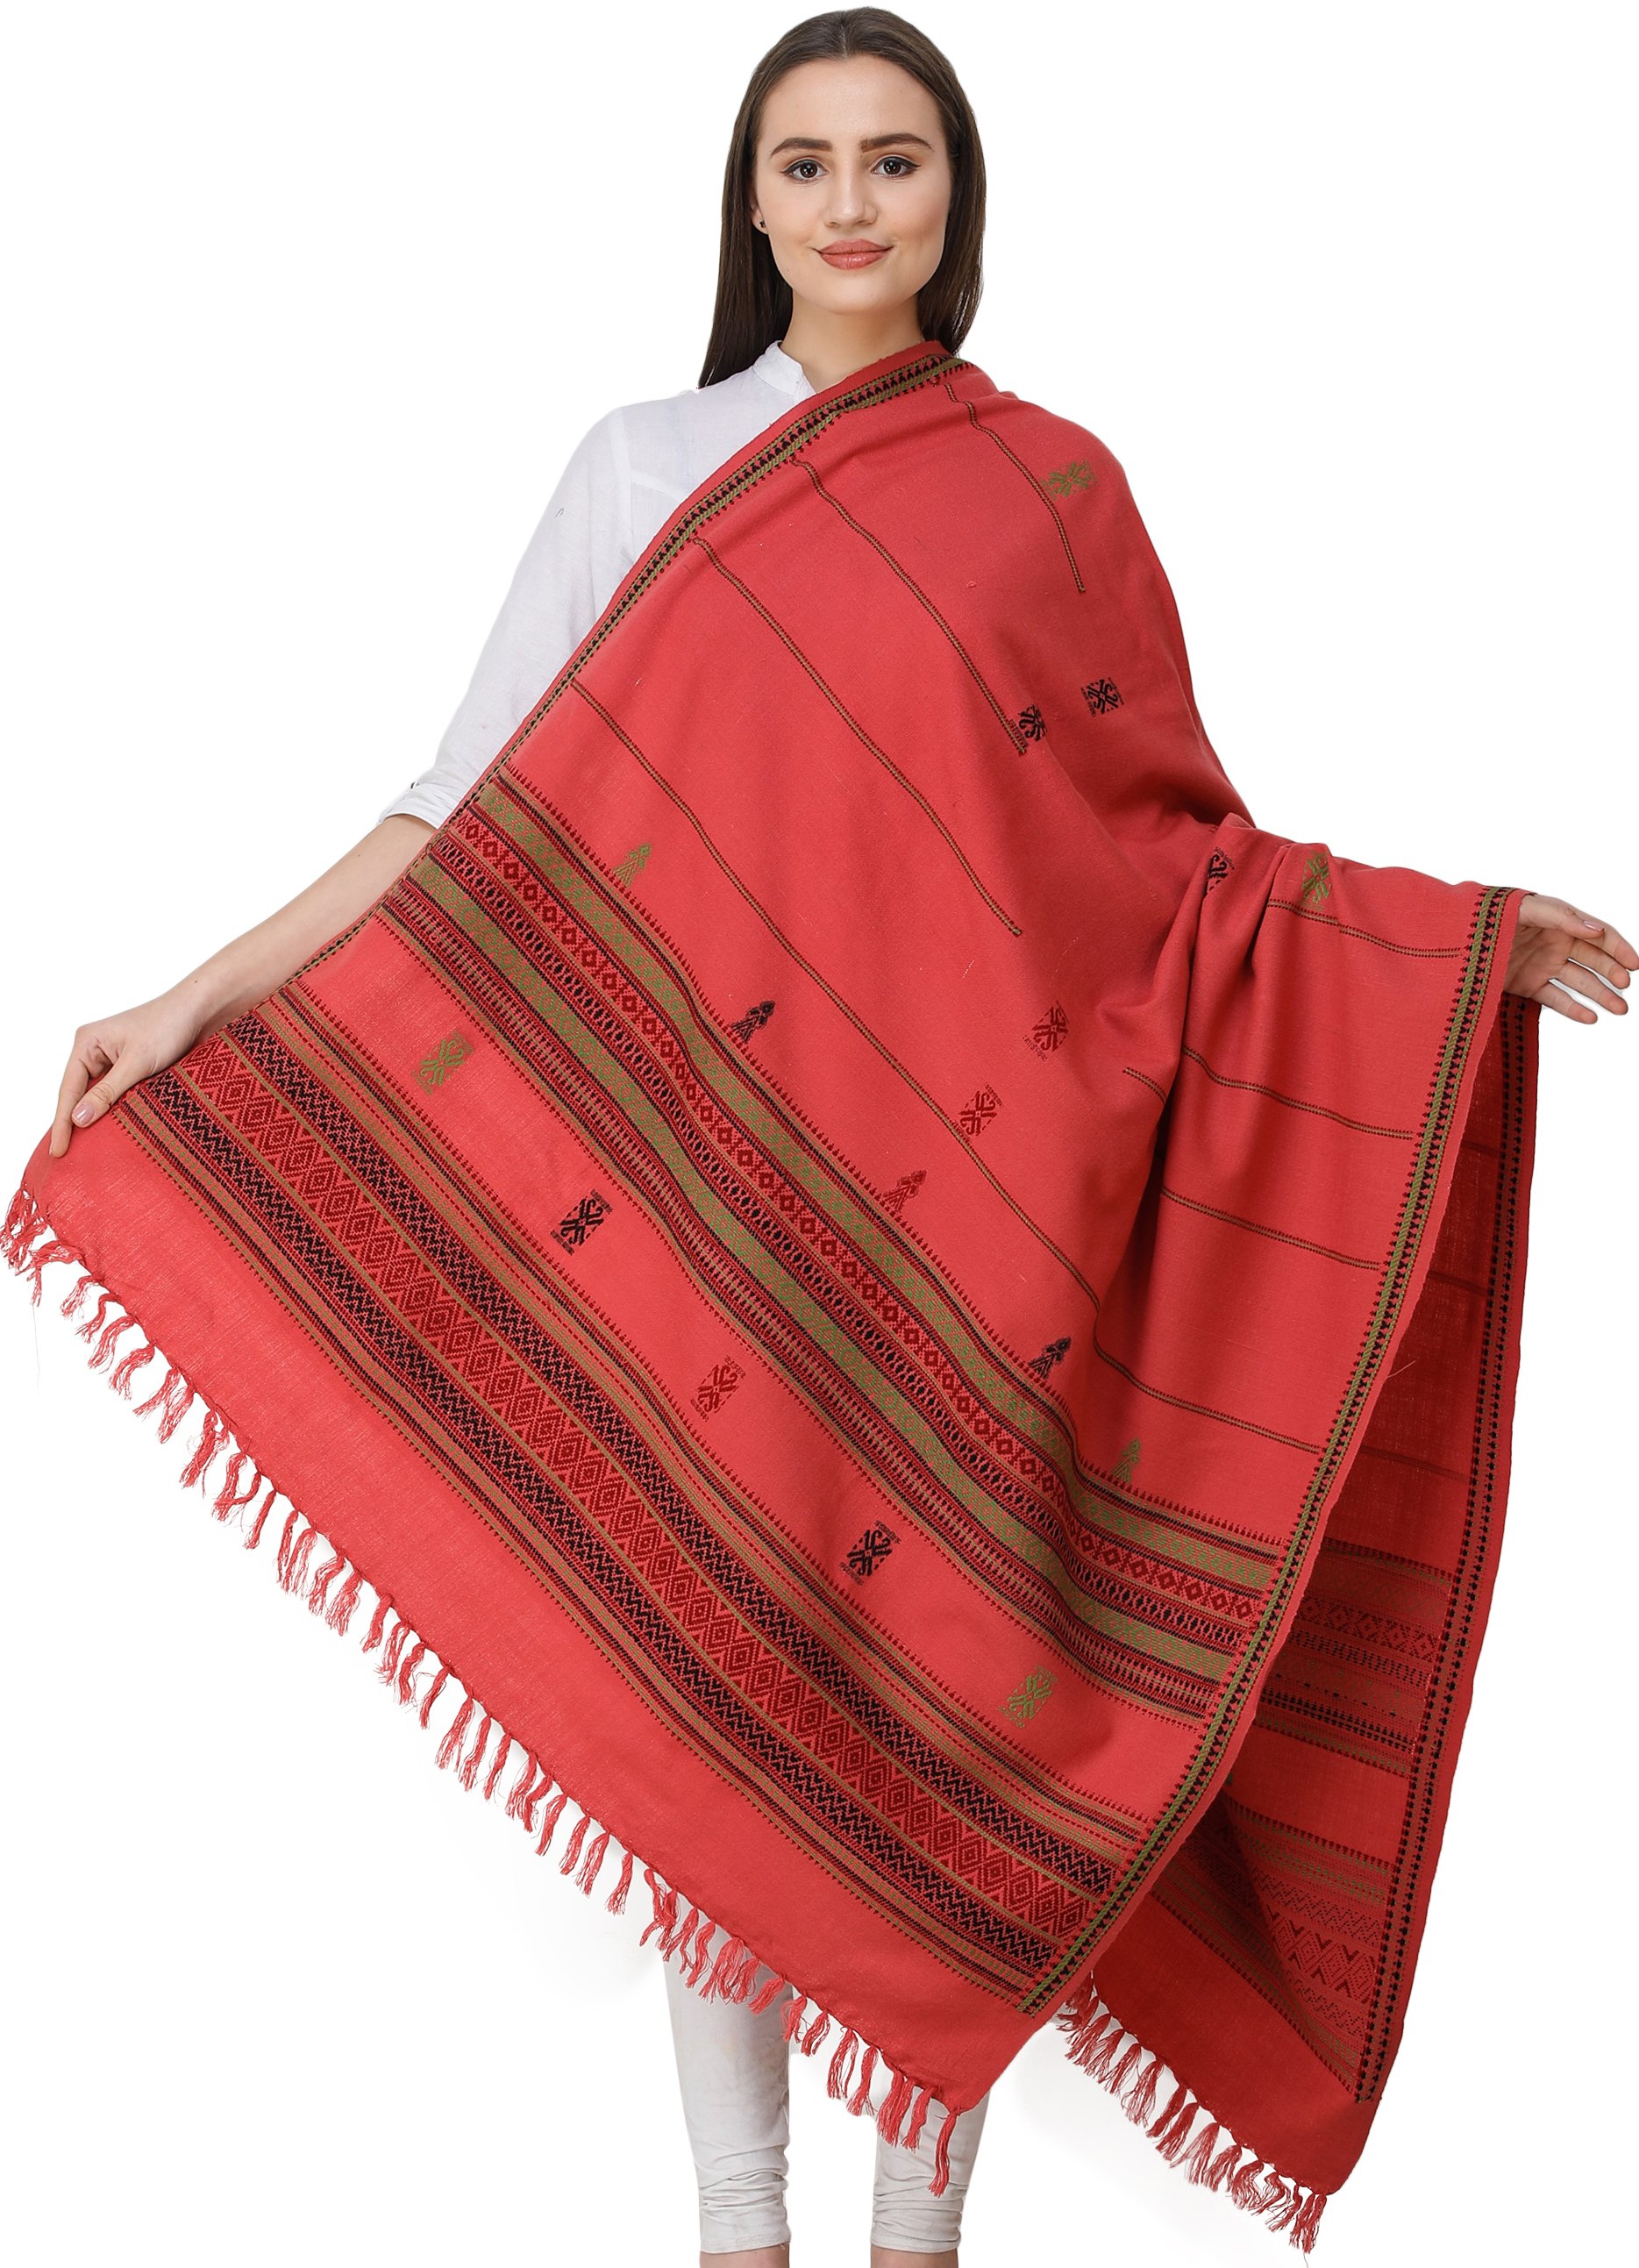 Handloom Shawl from Manipur with Traditional Motifs | Exotic India Art